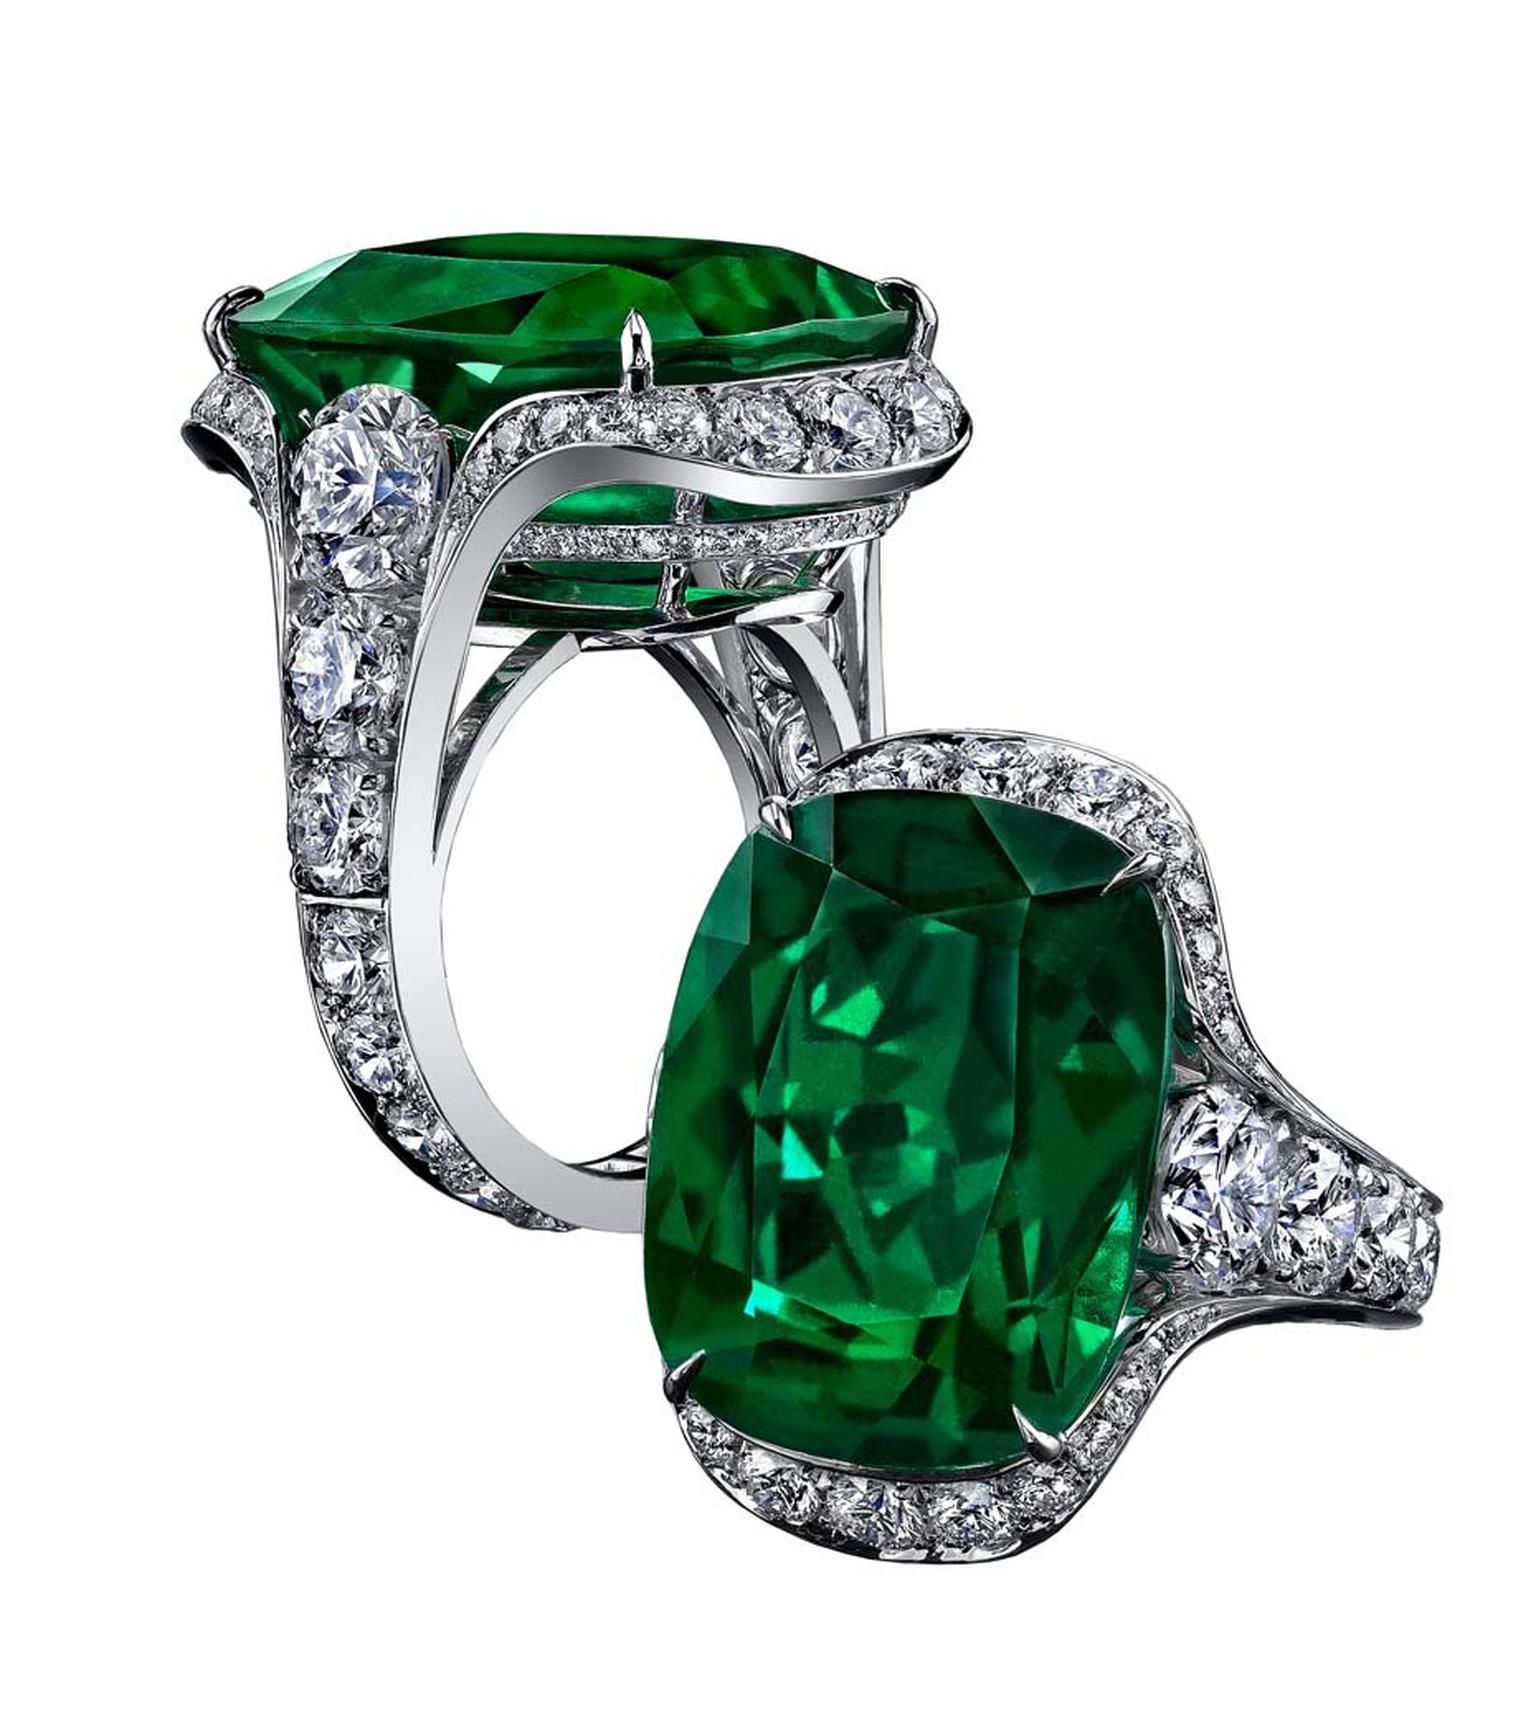 Robert Procop Exceptional Jewels collection 23.03ct Cushion Emerald ring